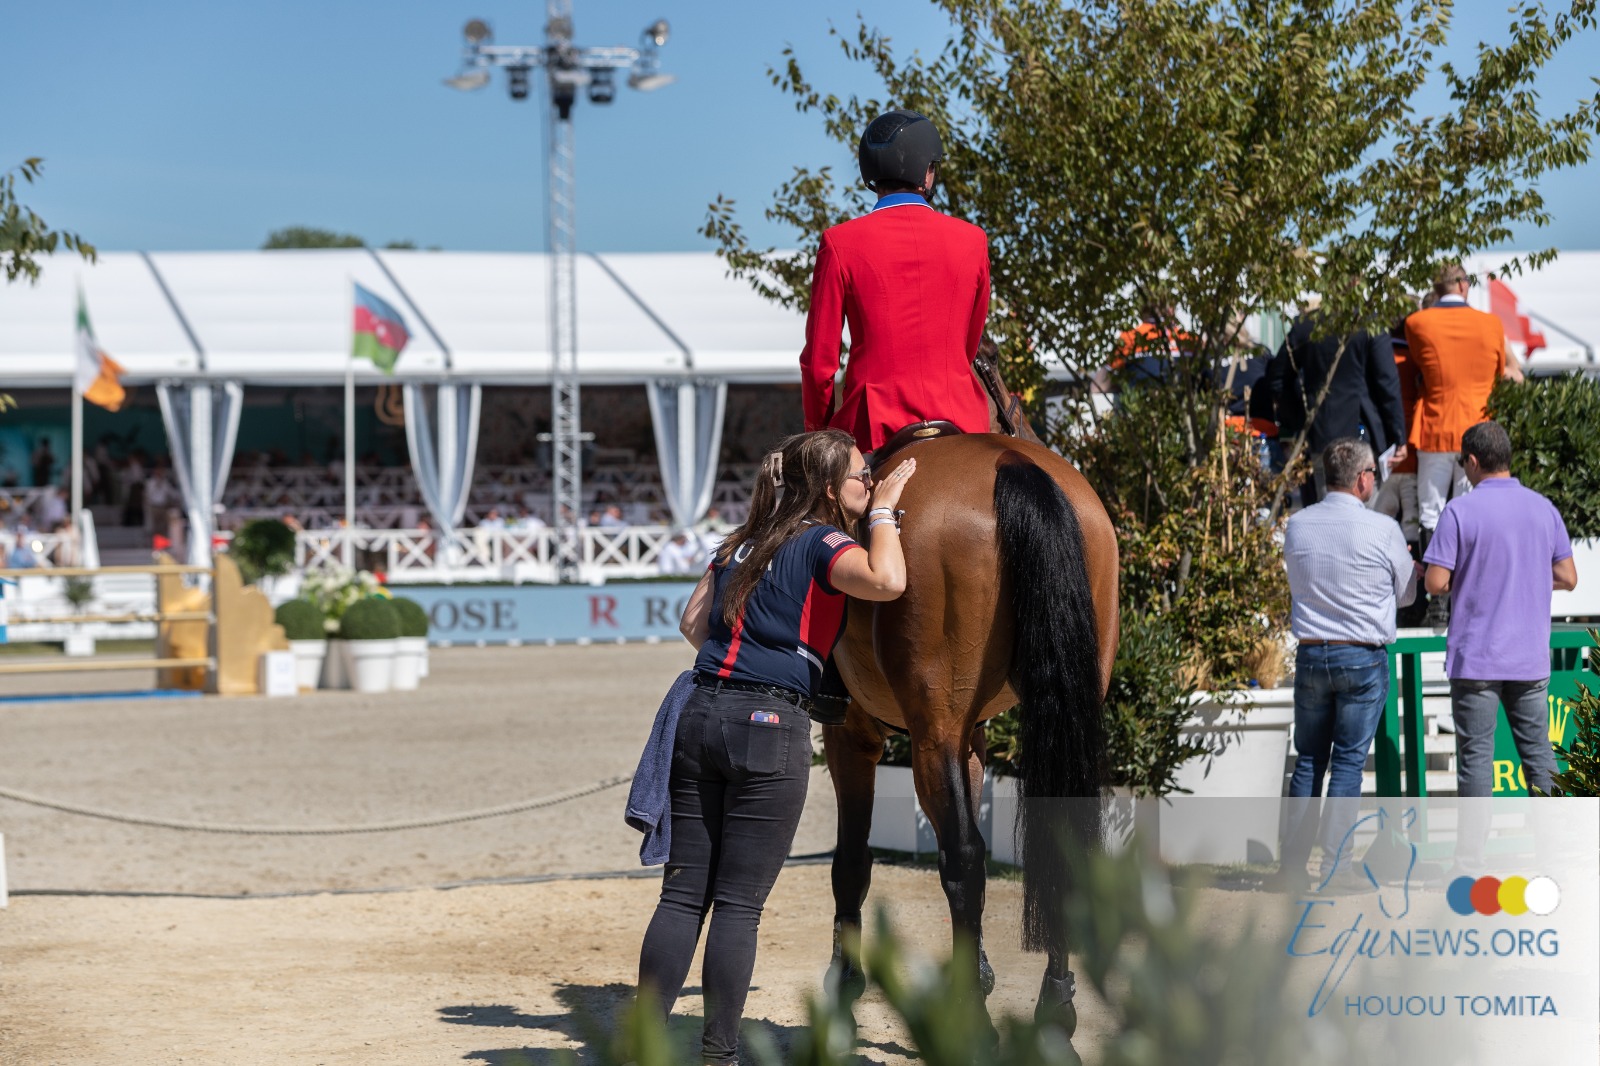 In conversation ... : This is how much you earn as an international showgroom